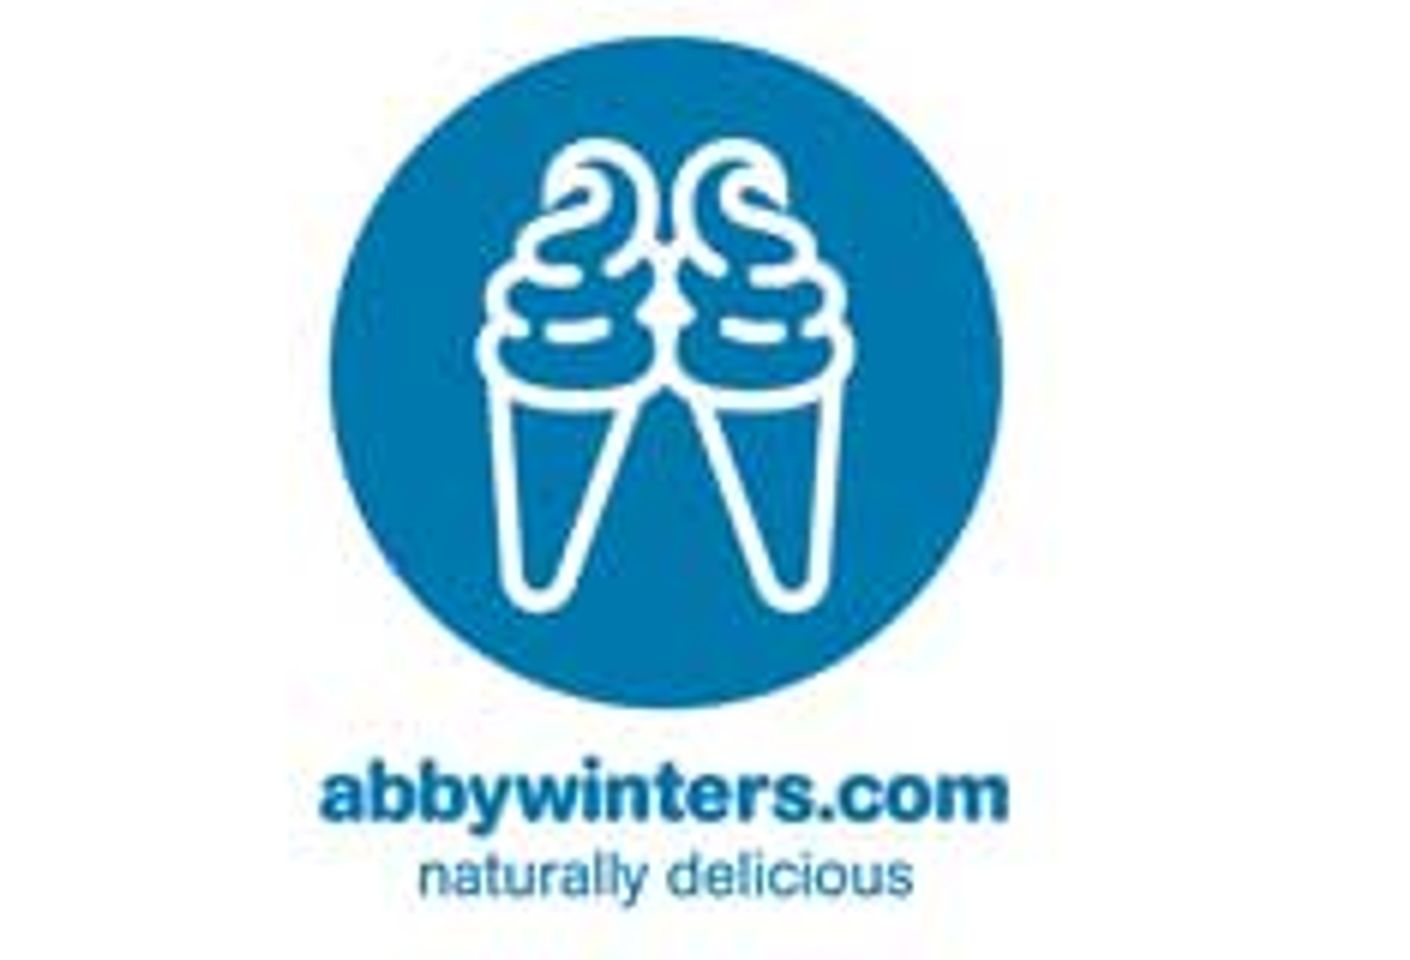 Abbywinters.com Implements Pay-Per-Scene